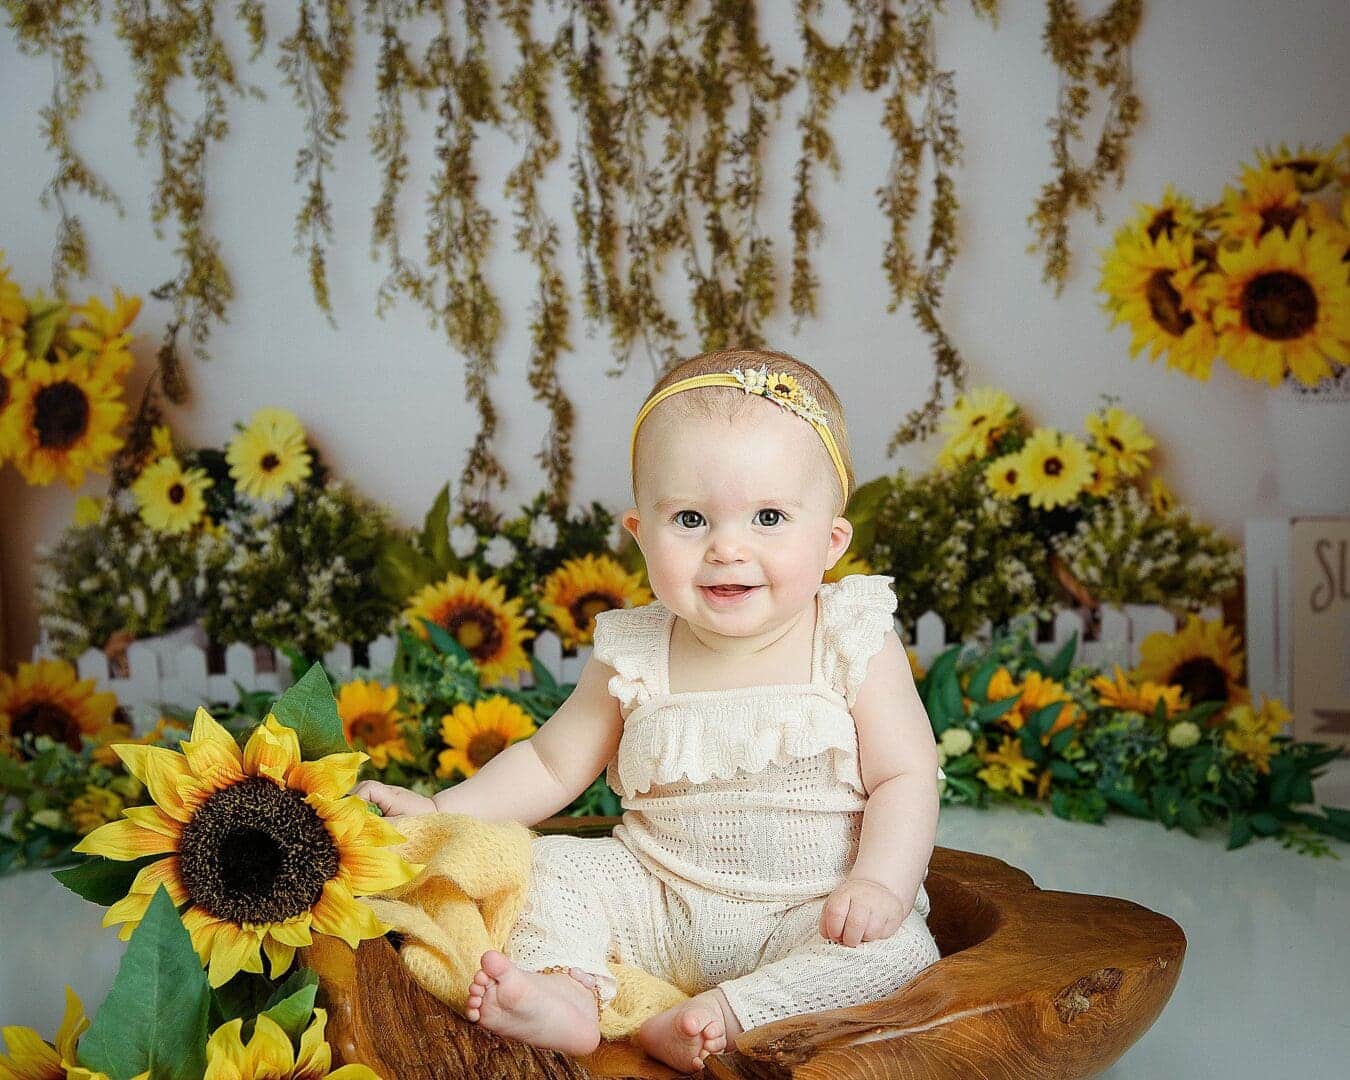 sunflower sitters session is so cute, little girl is smiling